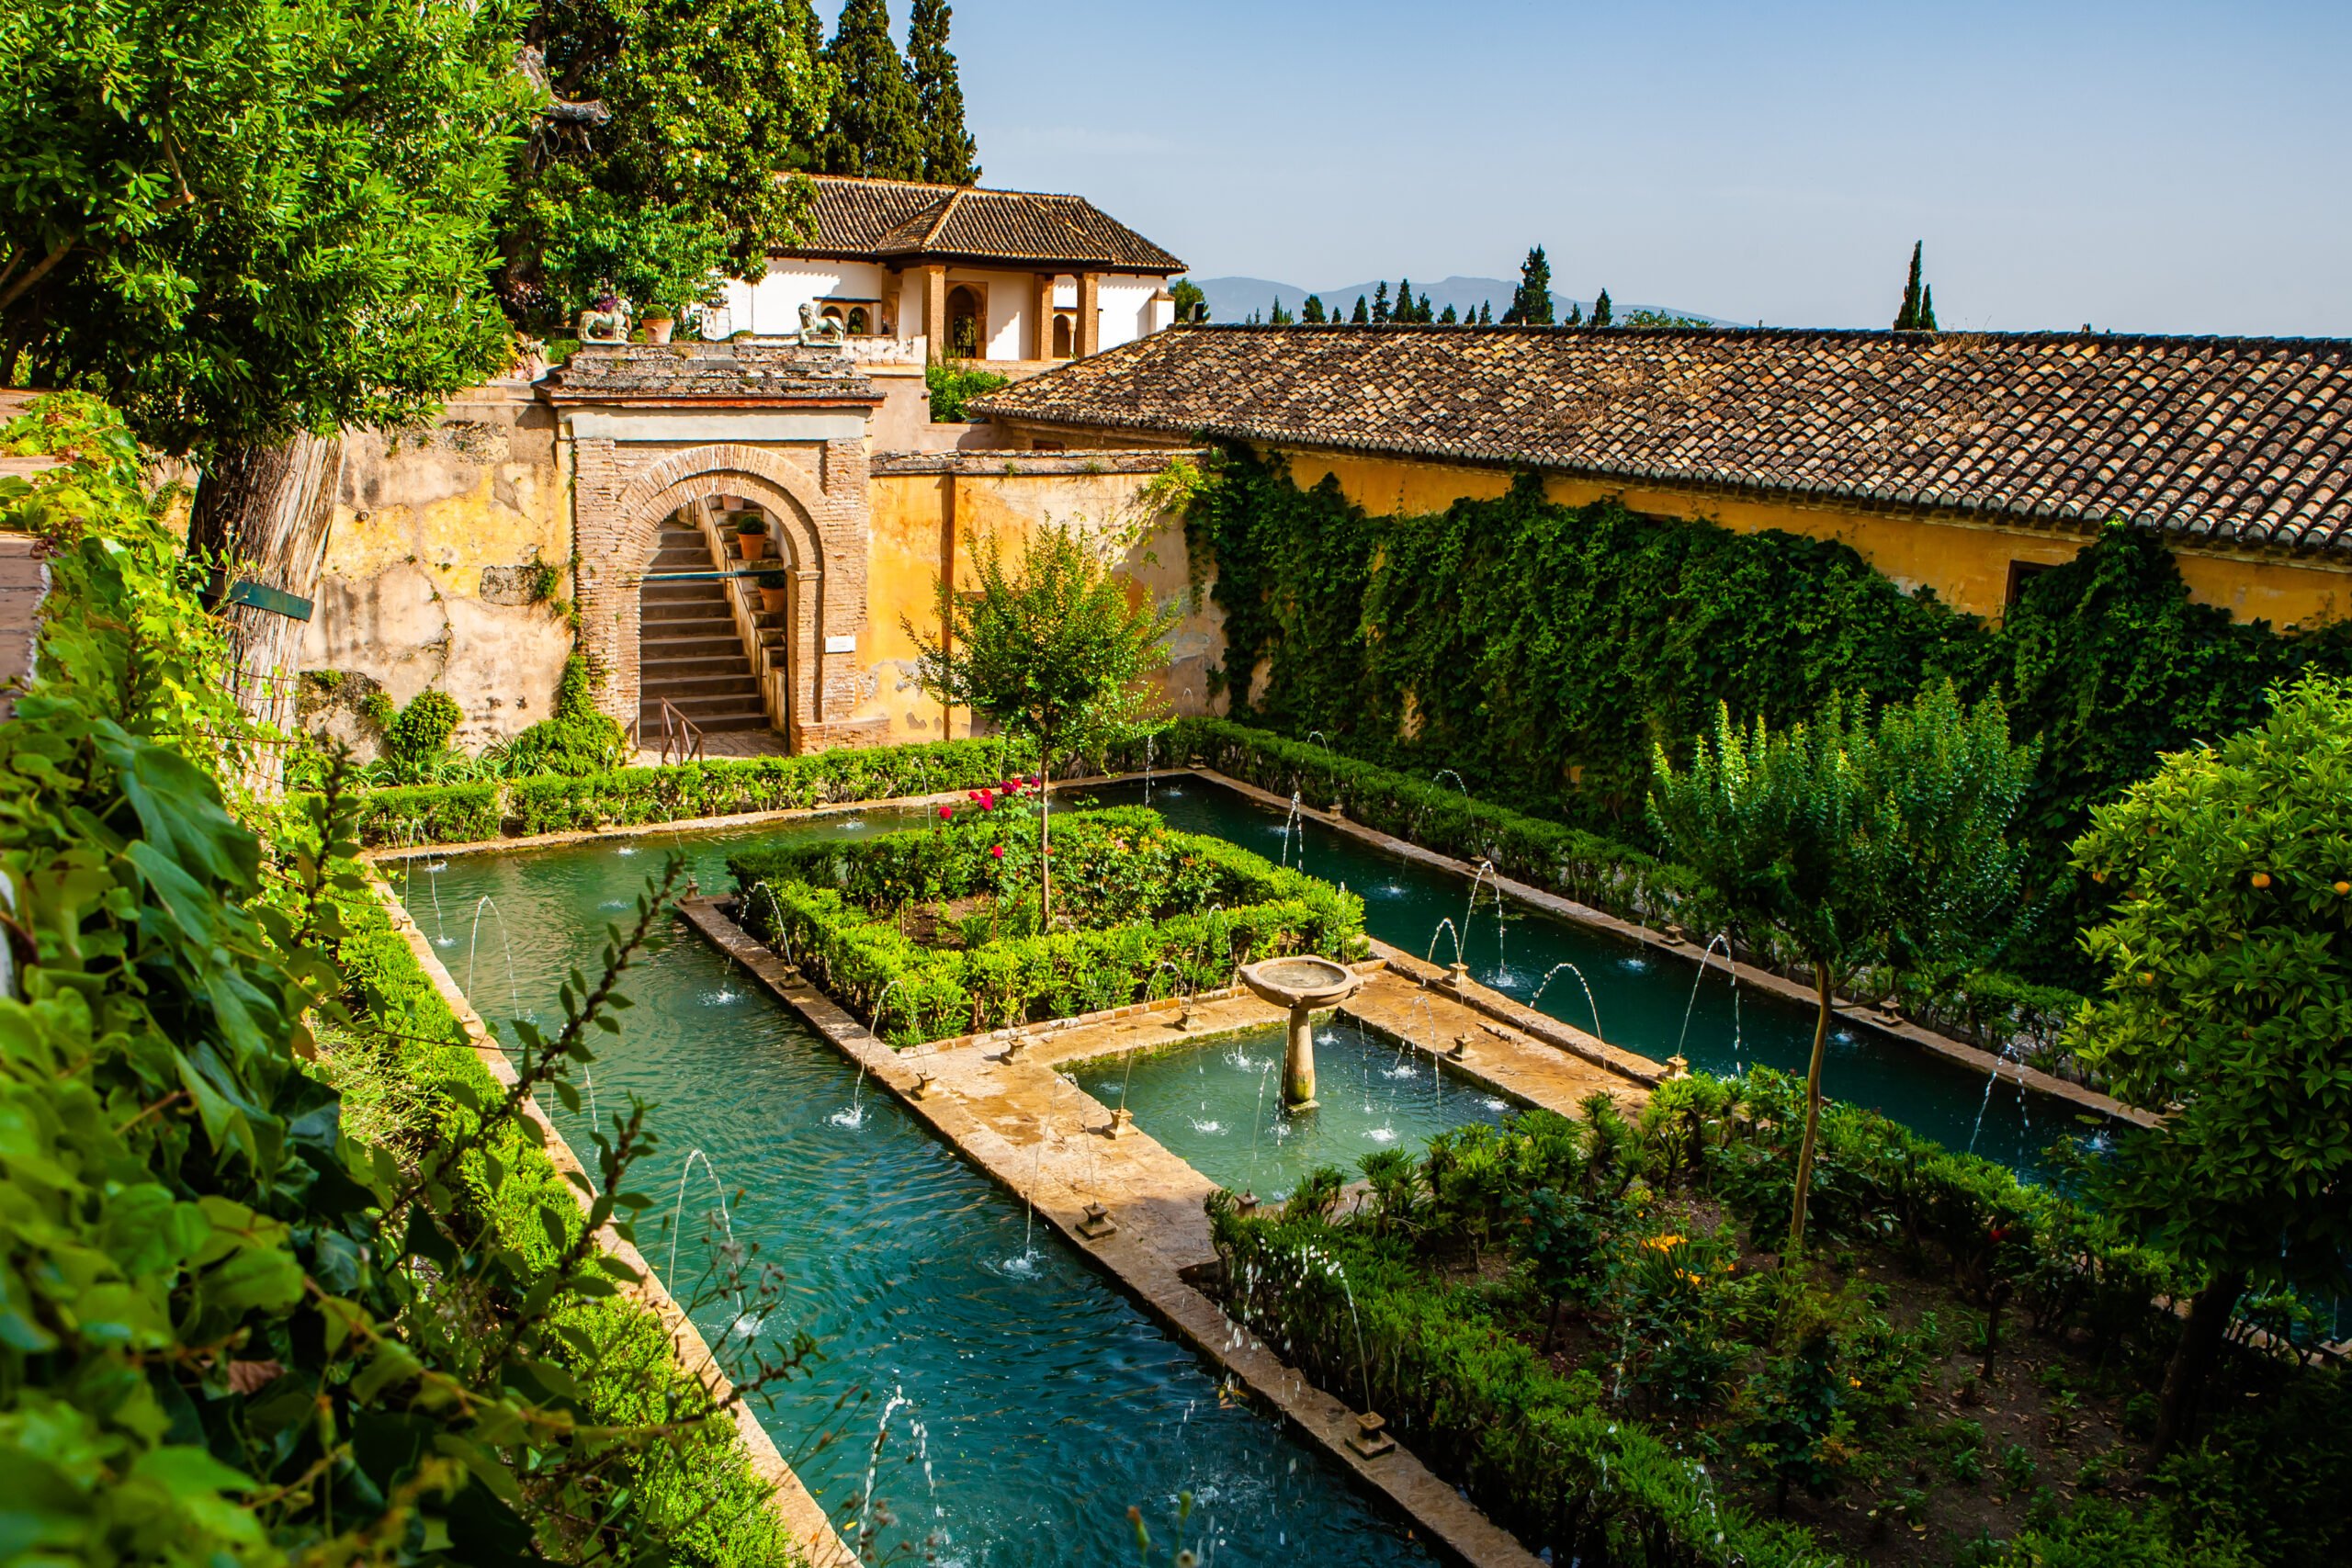 Discover The Beautiful Gardens Of The Palace On The Alhambra, Albaicin & Granada Old Town Tour From Granada